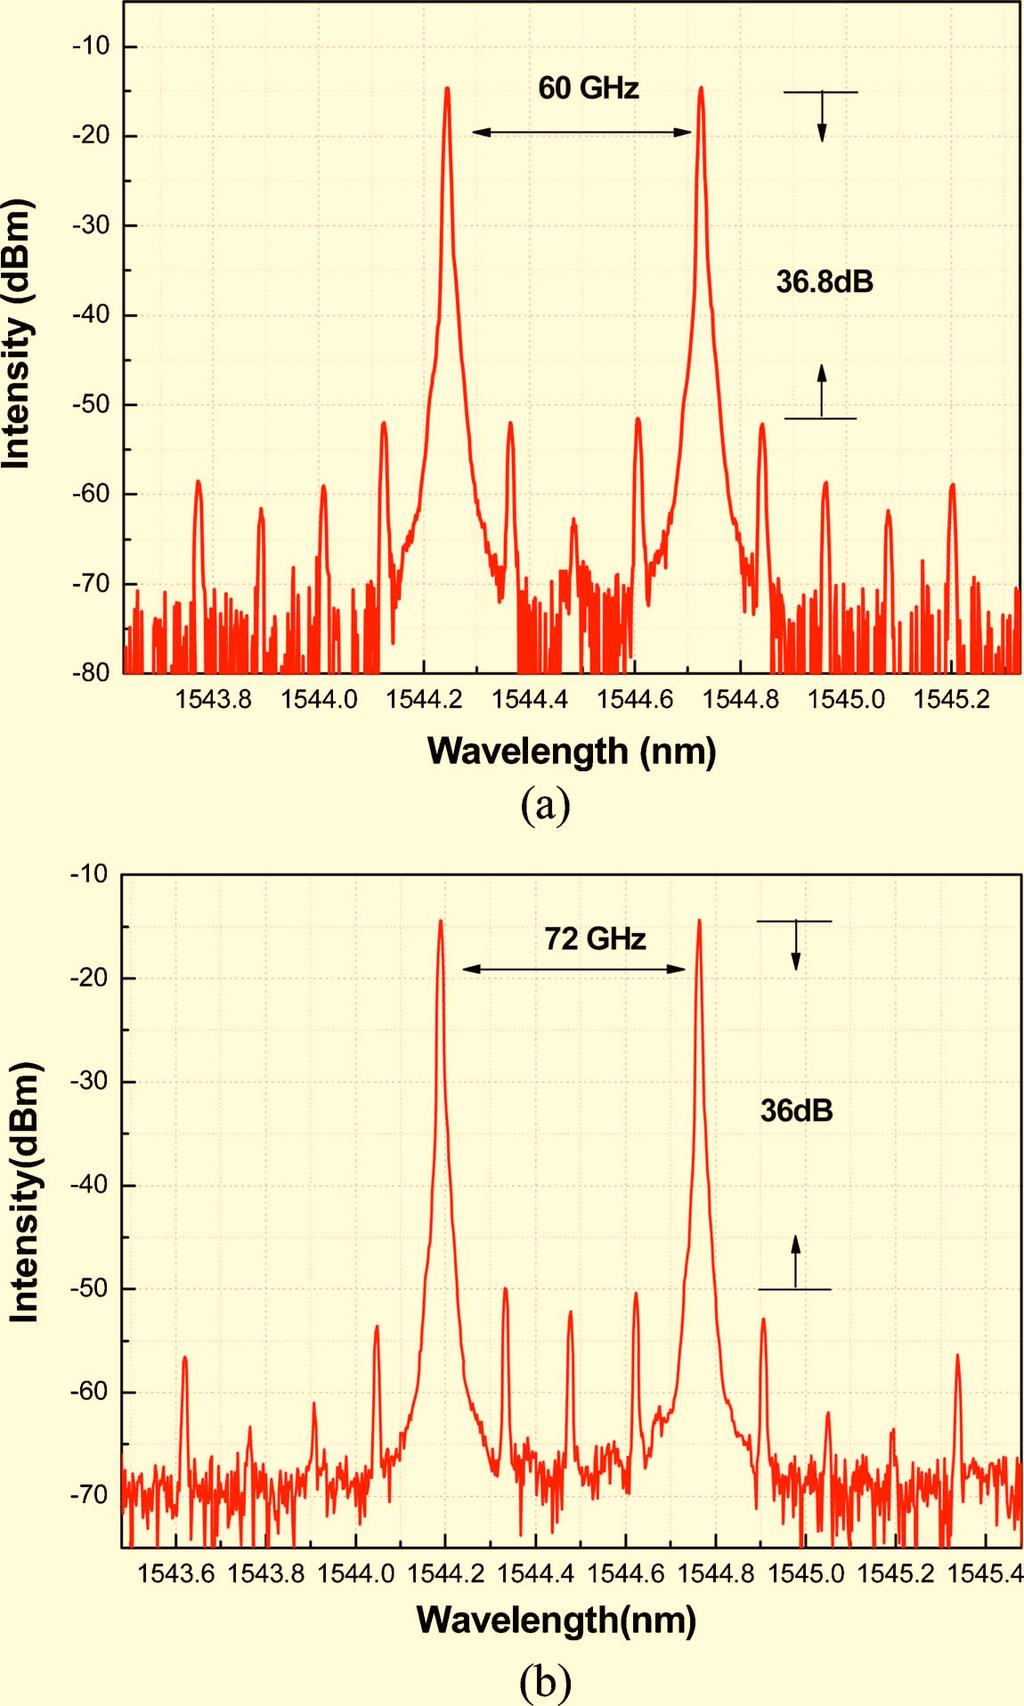 Vol. 8, No. 2 / February 2009 / JOURNAL OF OPTICAL NETWORKING 195 Fig. 5. Optical spectrum of the generated 60 and 72 GHz millimeter-wave signal using 15 and 18 GHz driving signal, respectively.